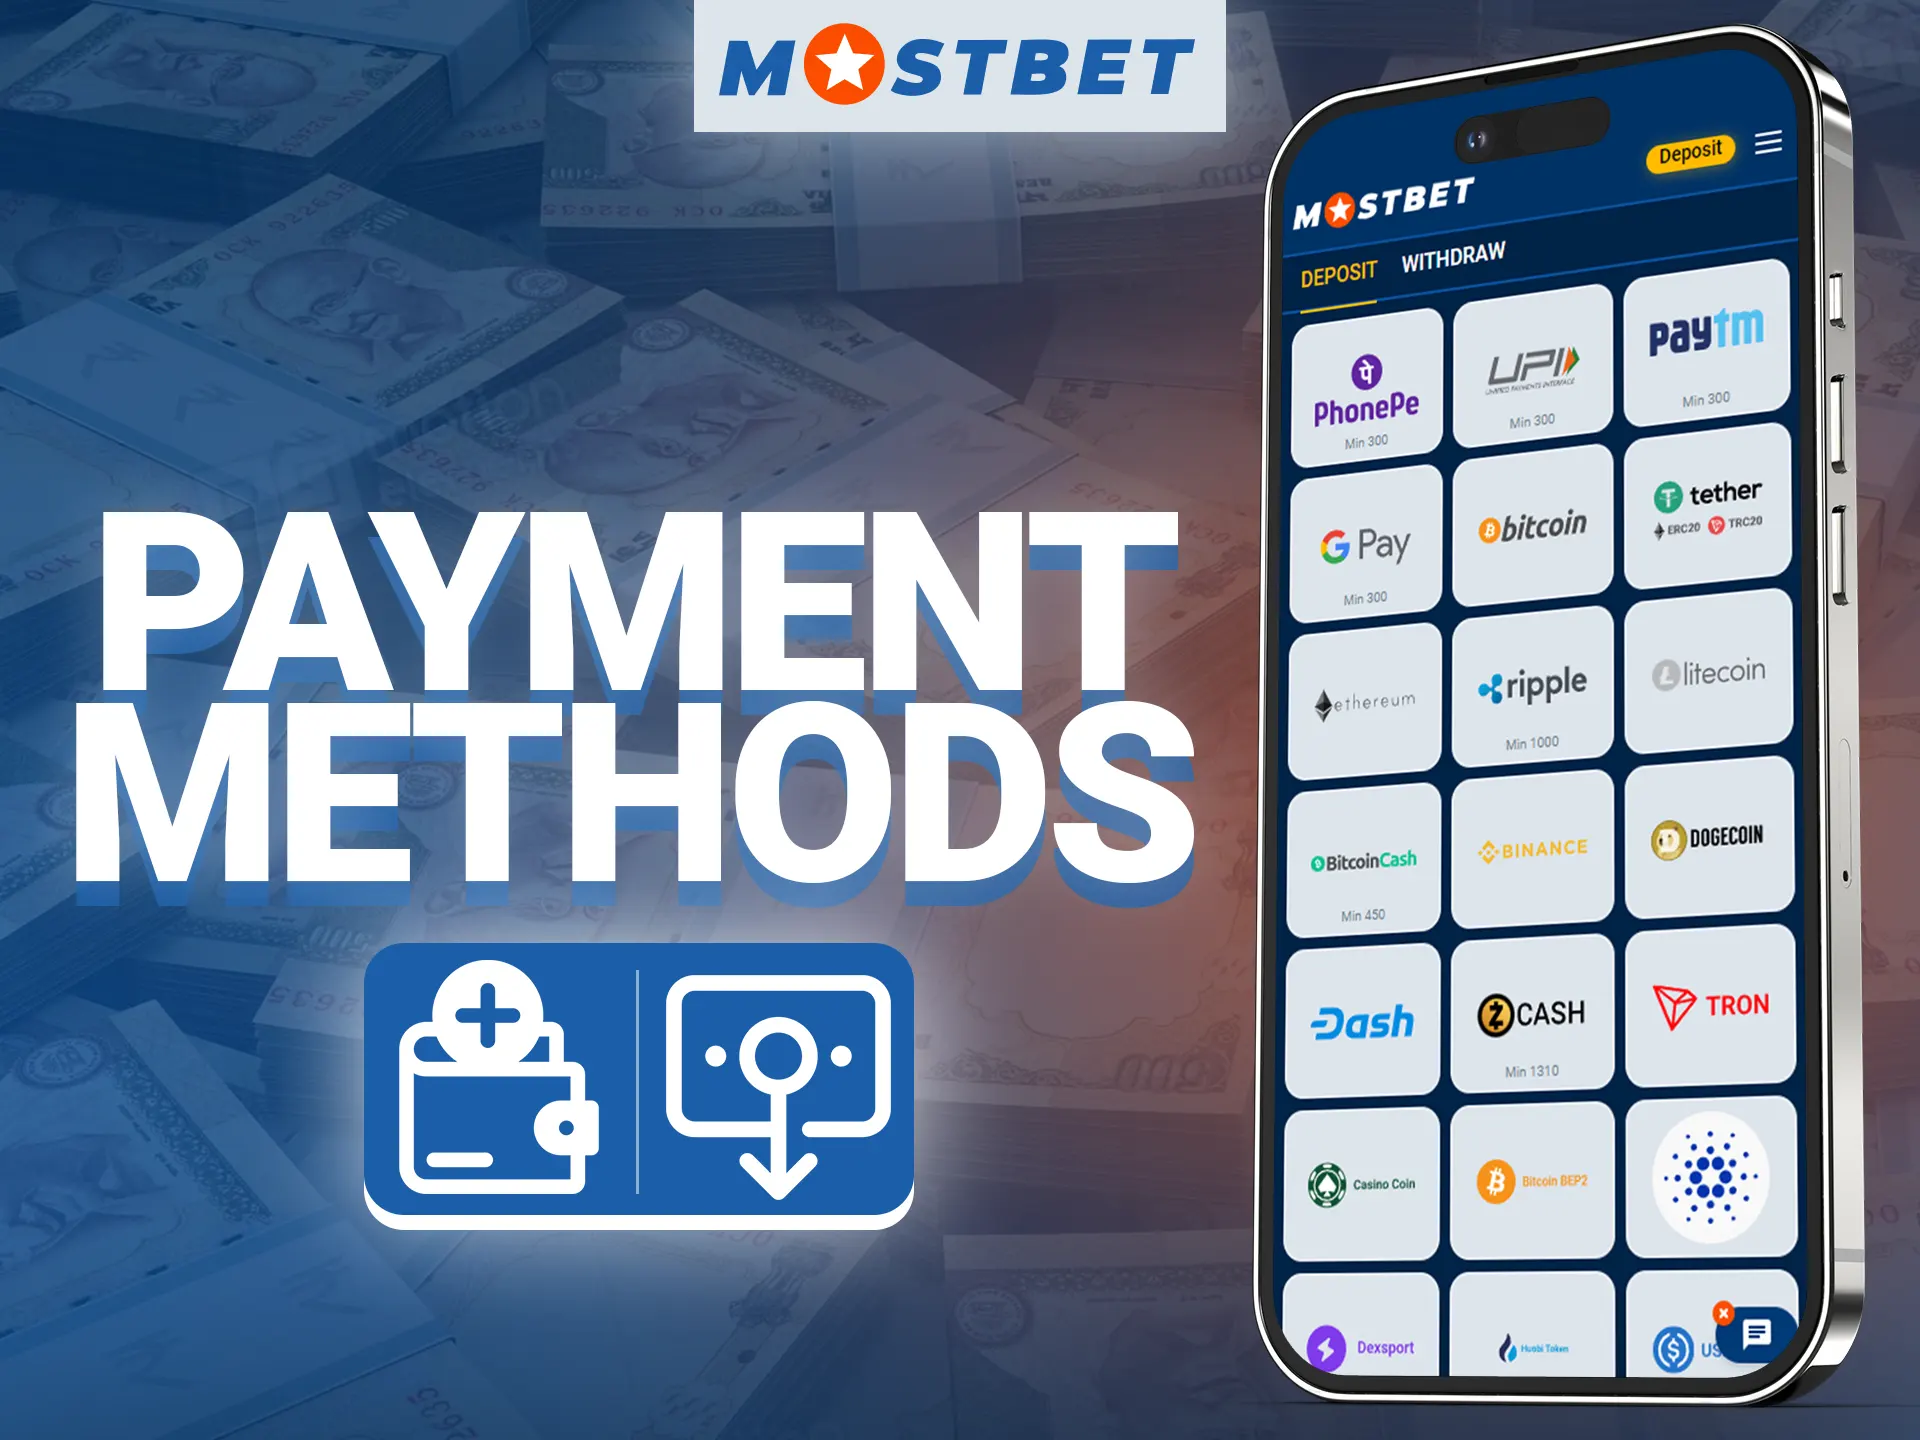 The Mostbet app provides its users with a large selection of payment methods.